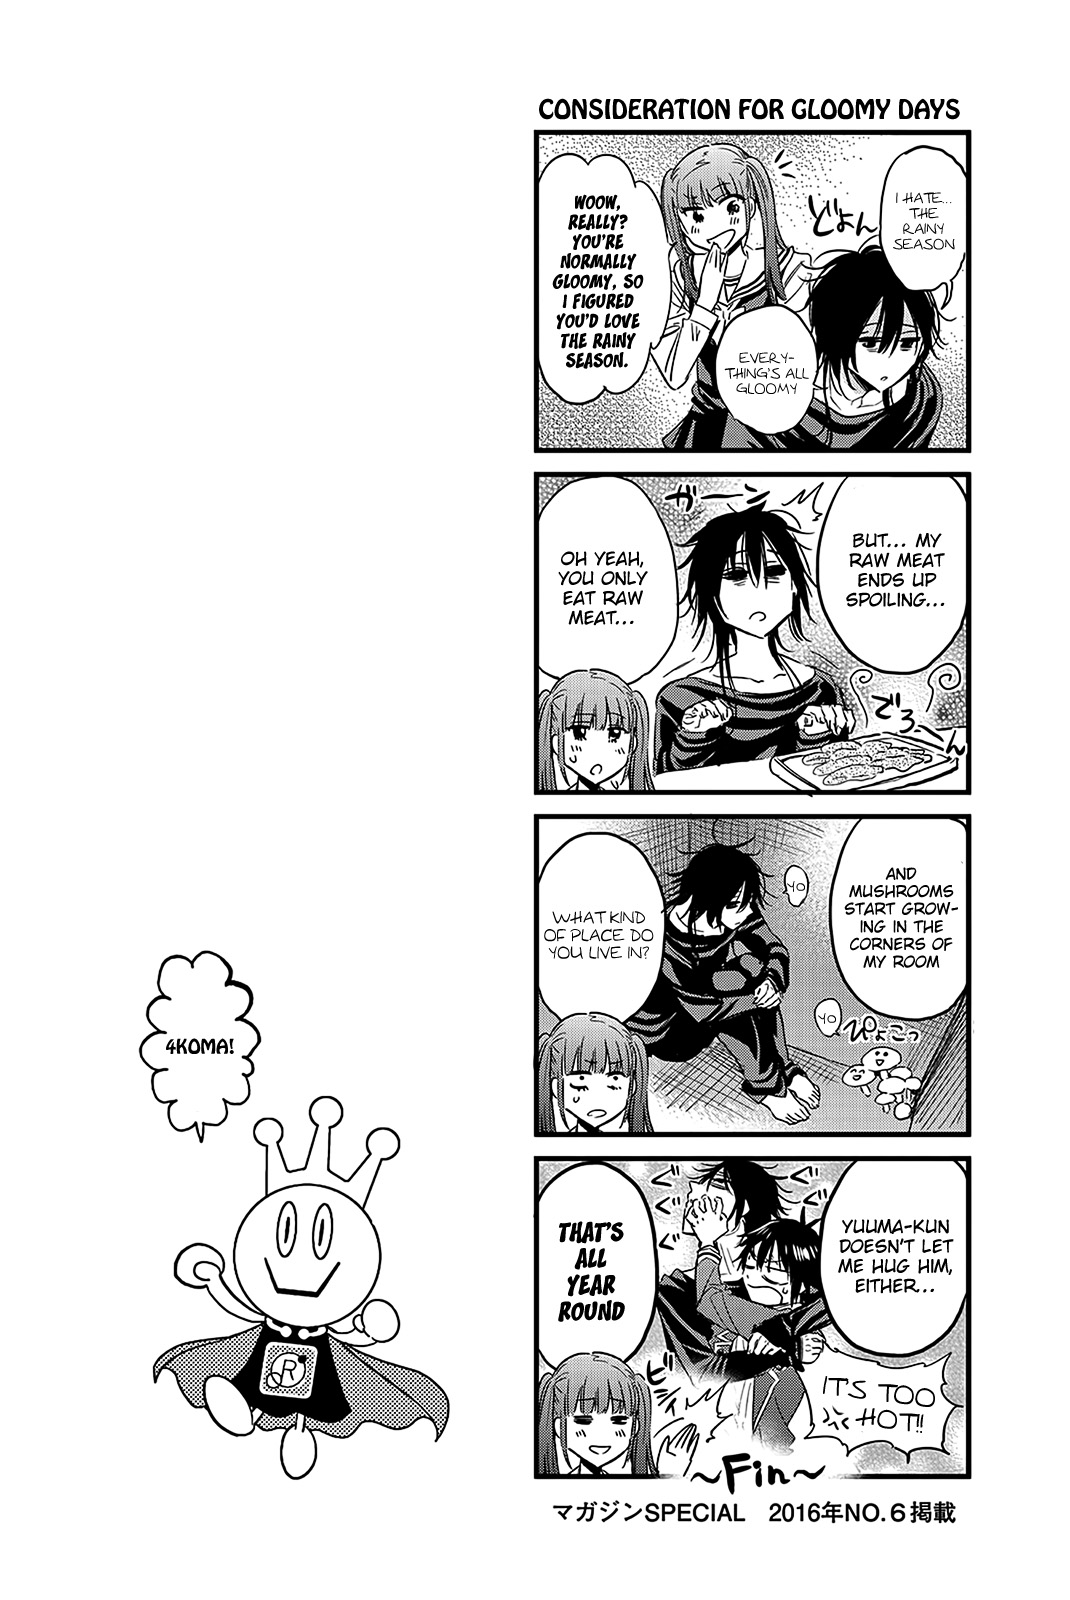 Real Account Vol. 10 Ch. 76 Hard Mode